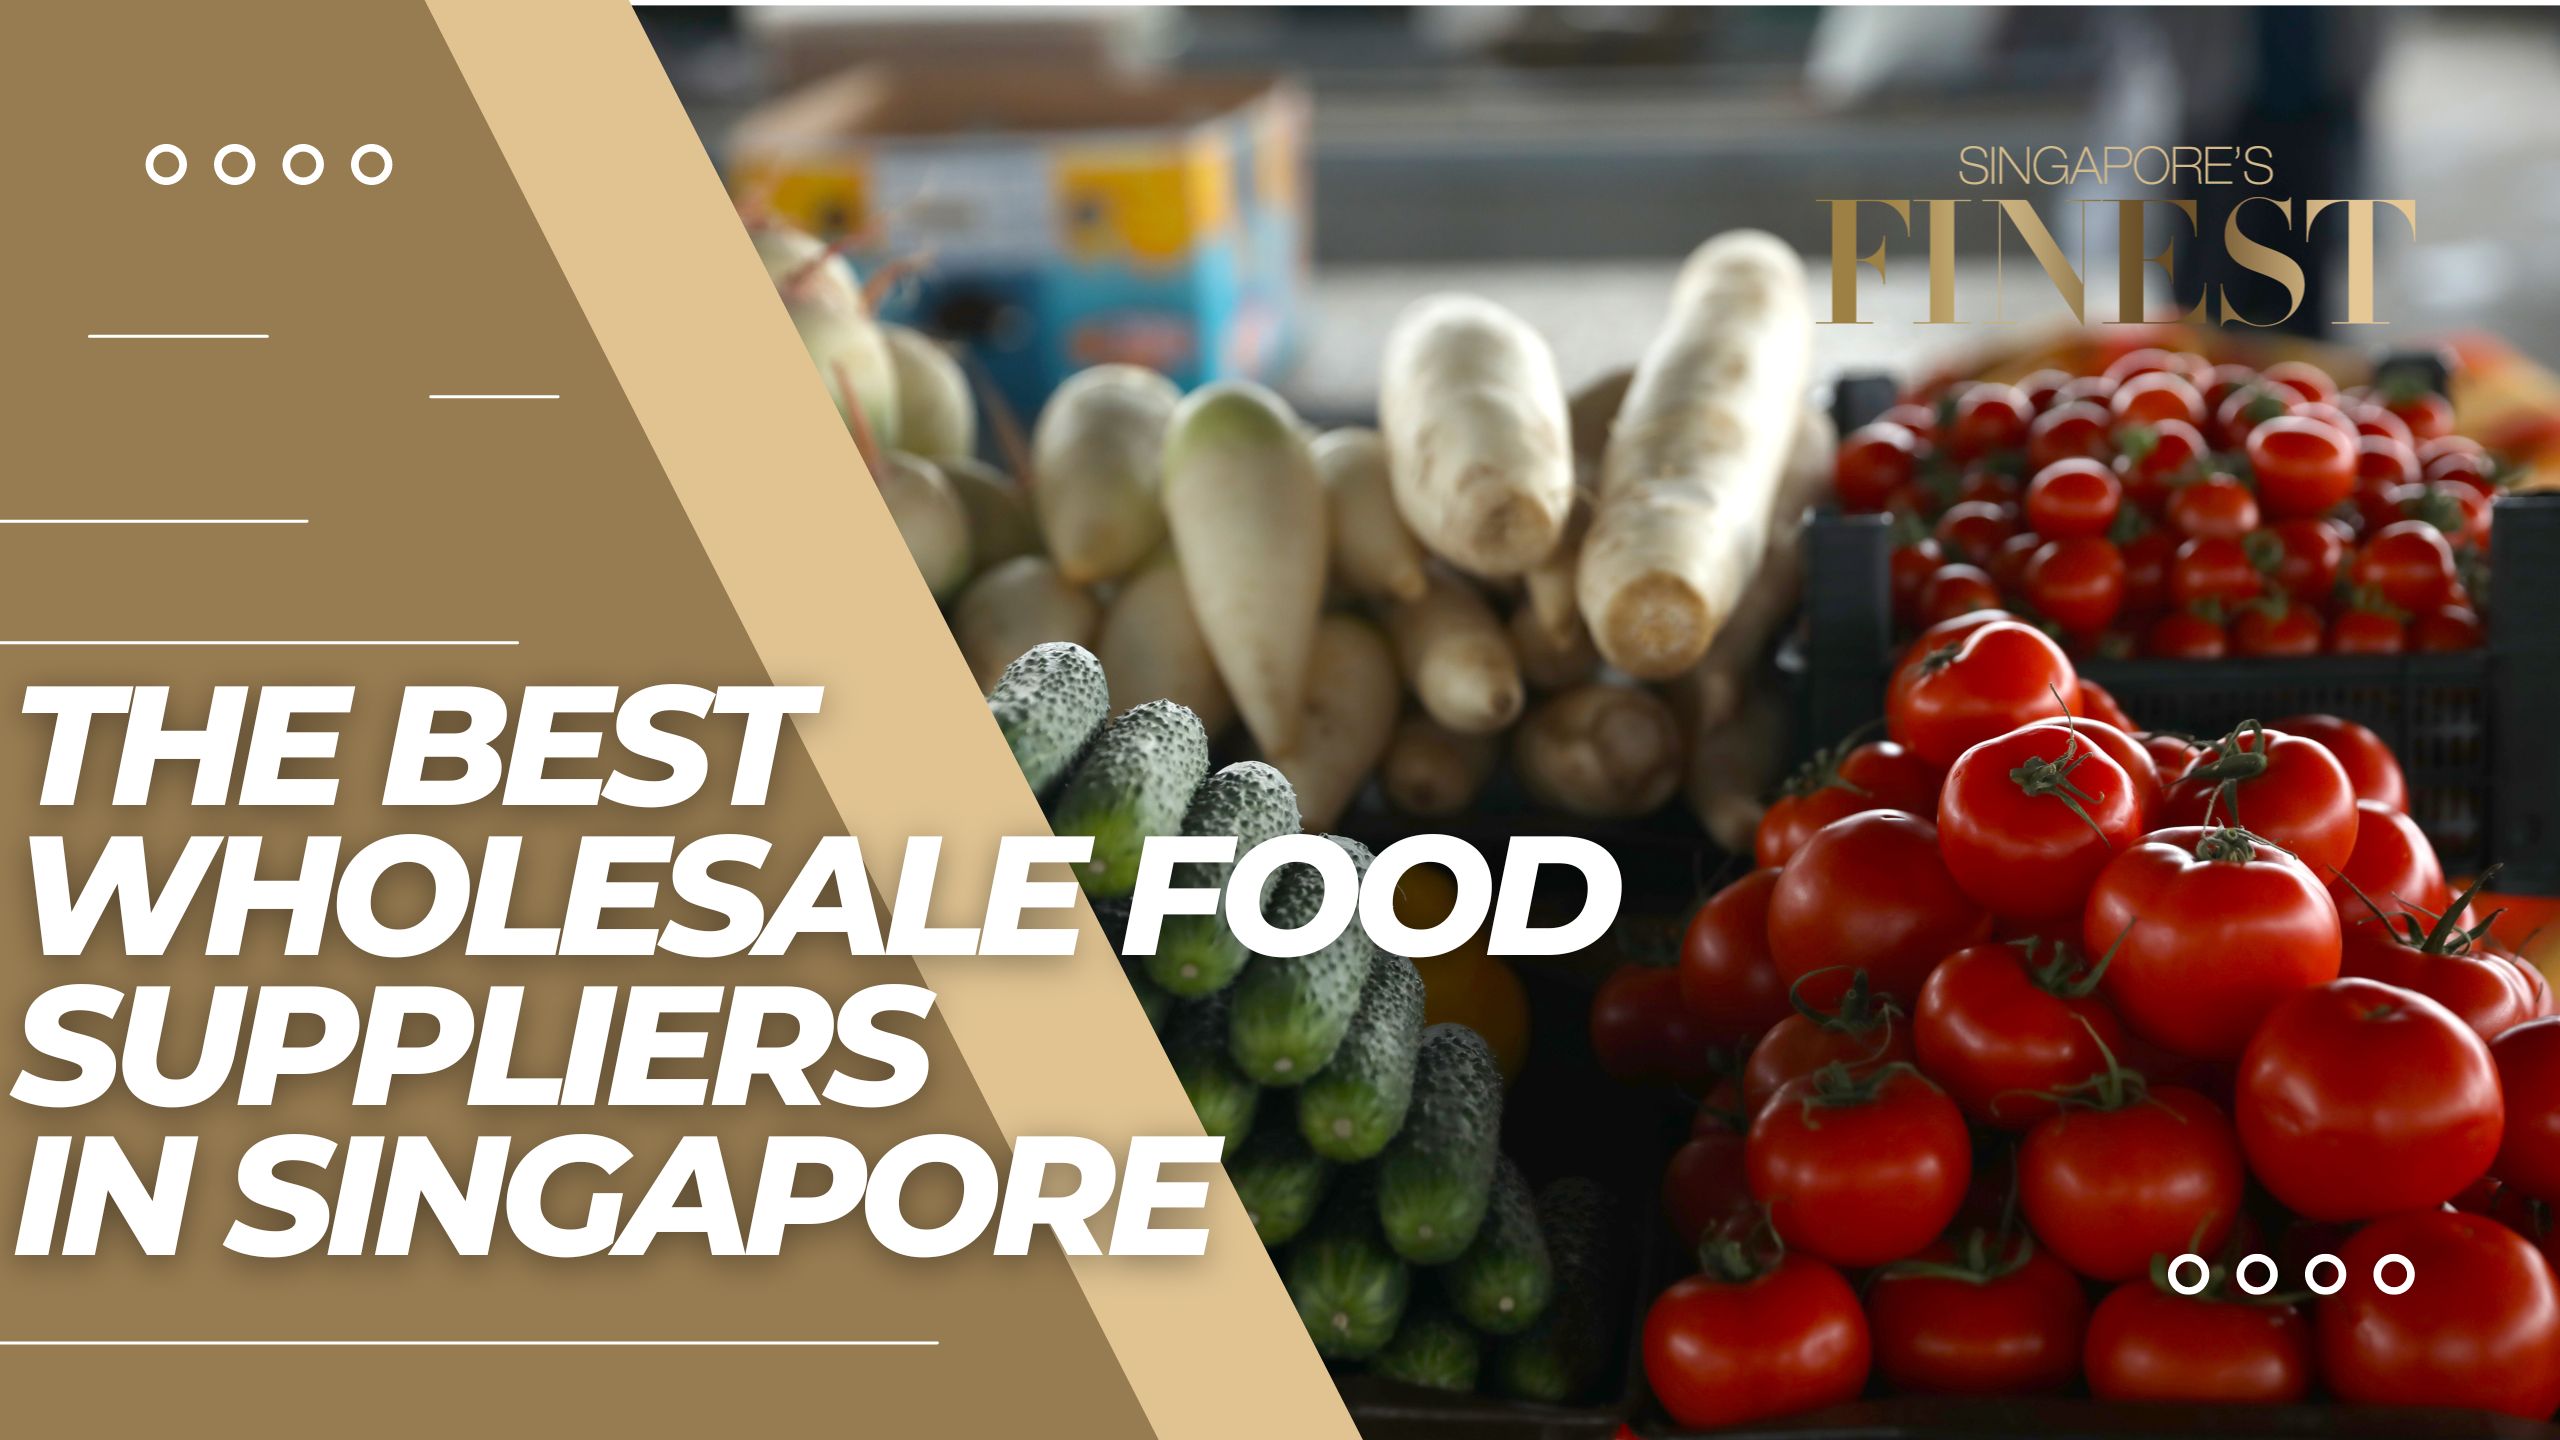 The Finest Wholesale Food Suppliers in Singapore